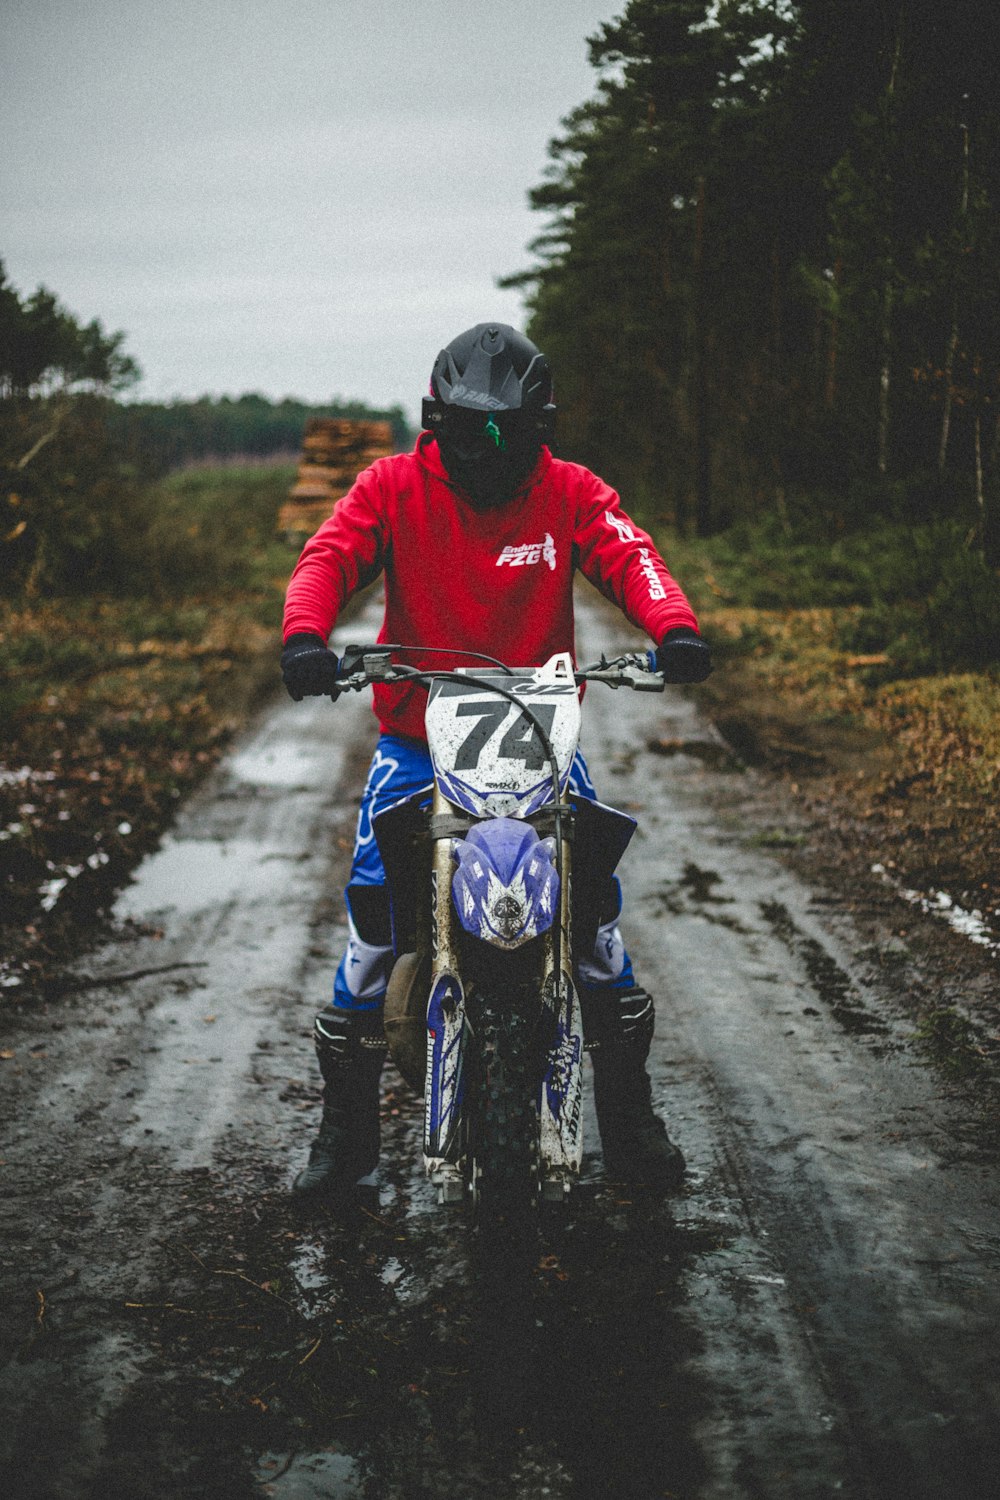 a person riding a dirt bike on a wet road